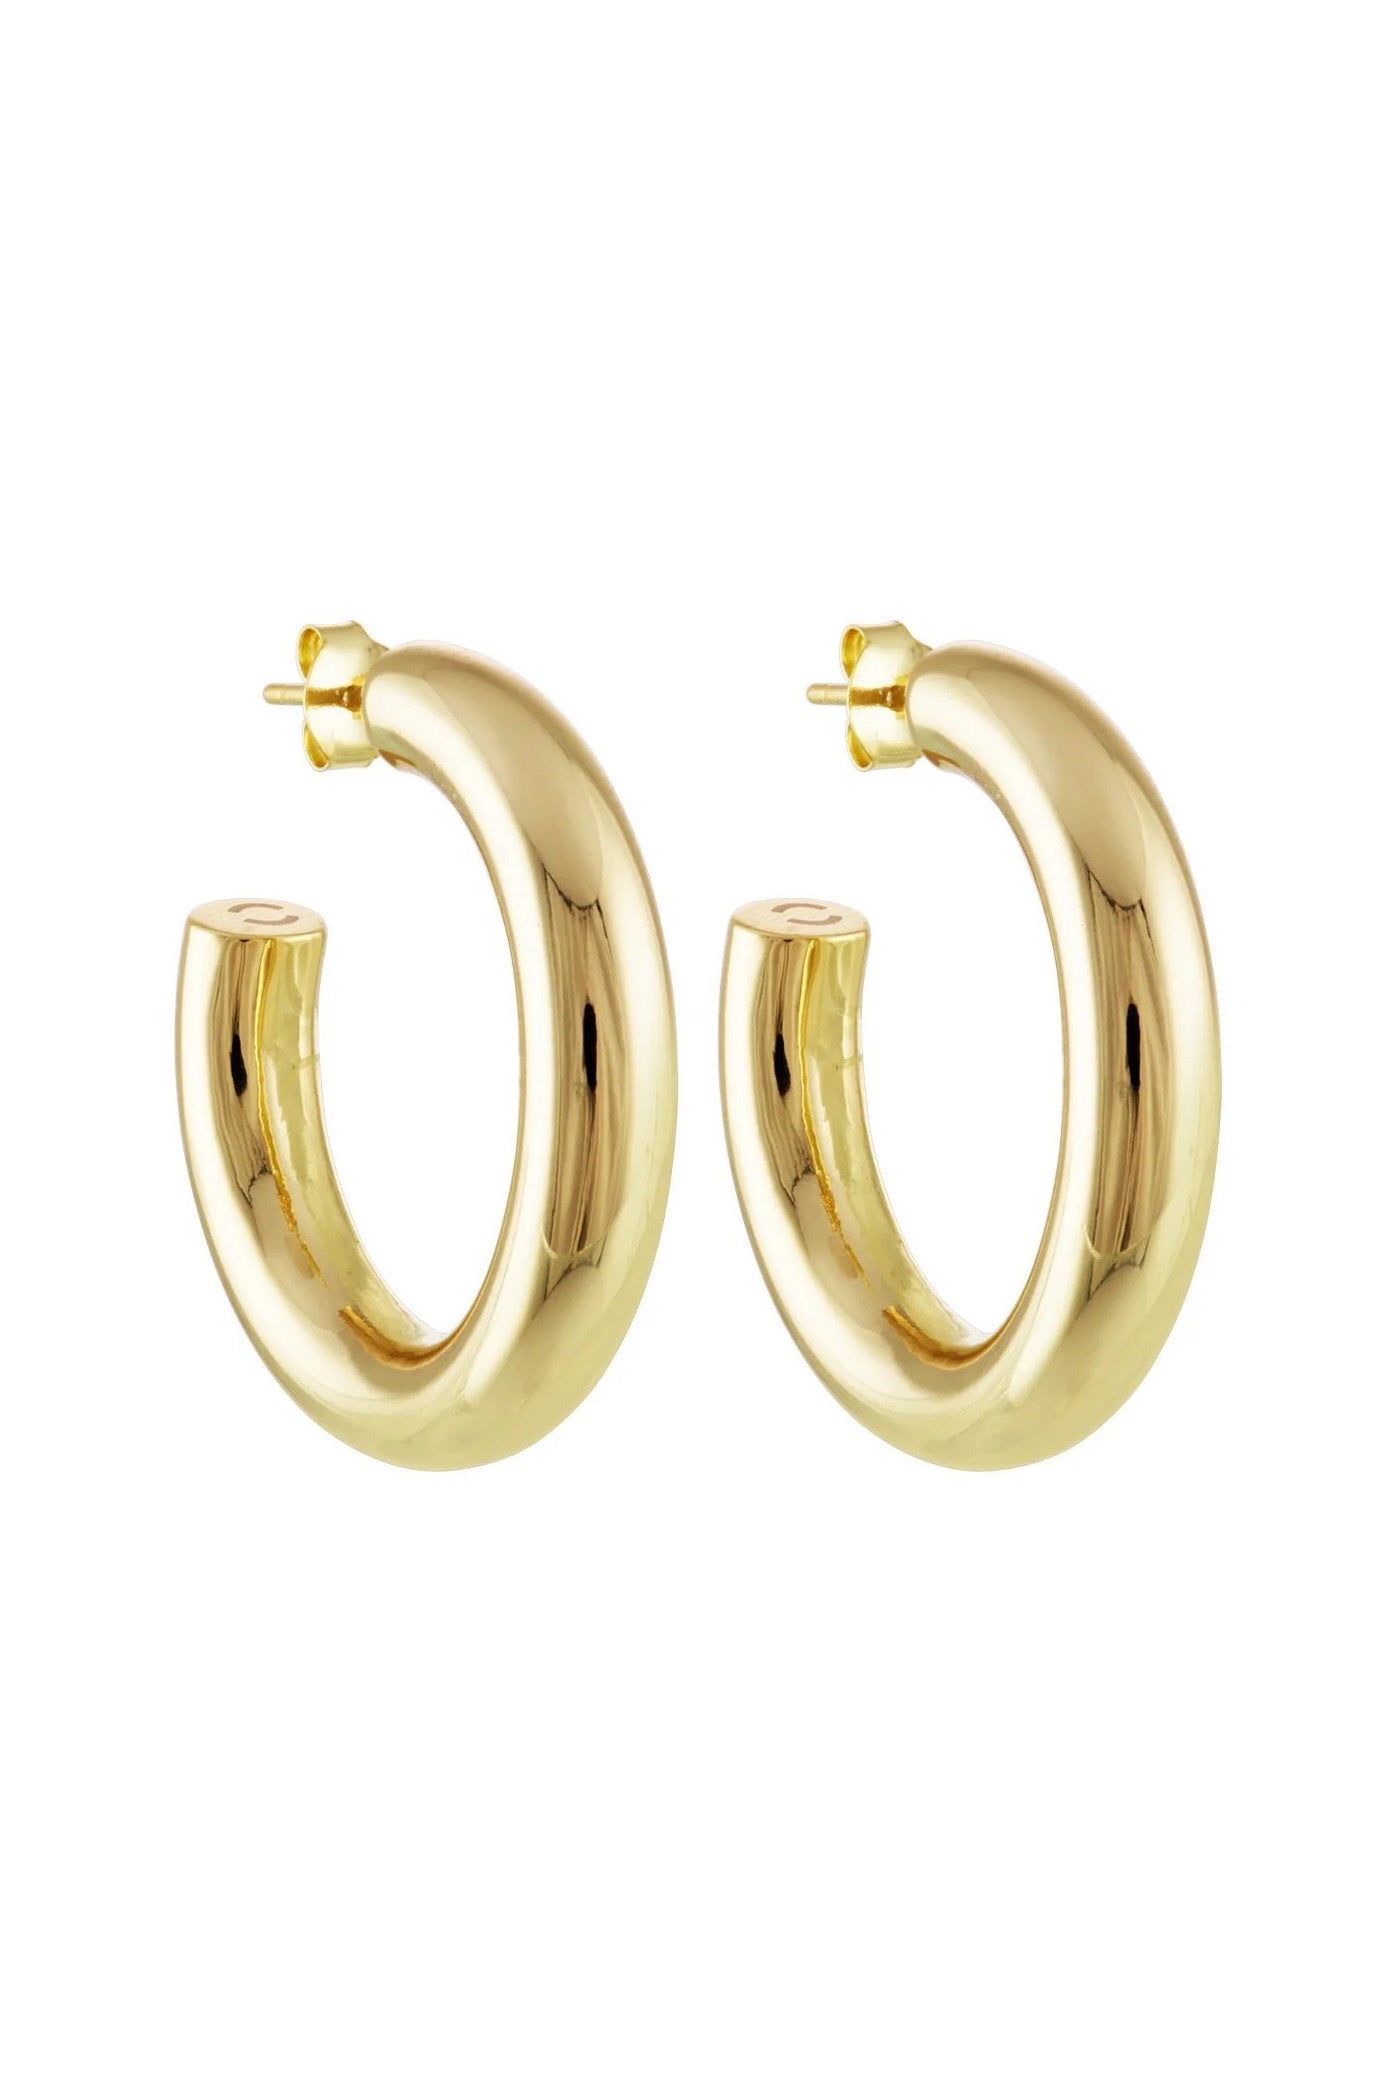 MACHETE 1" Perfect Hoops in Gold